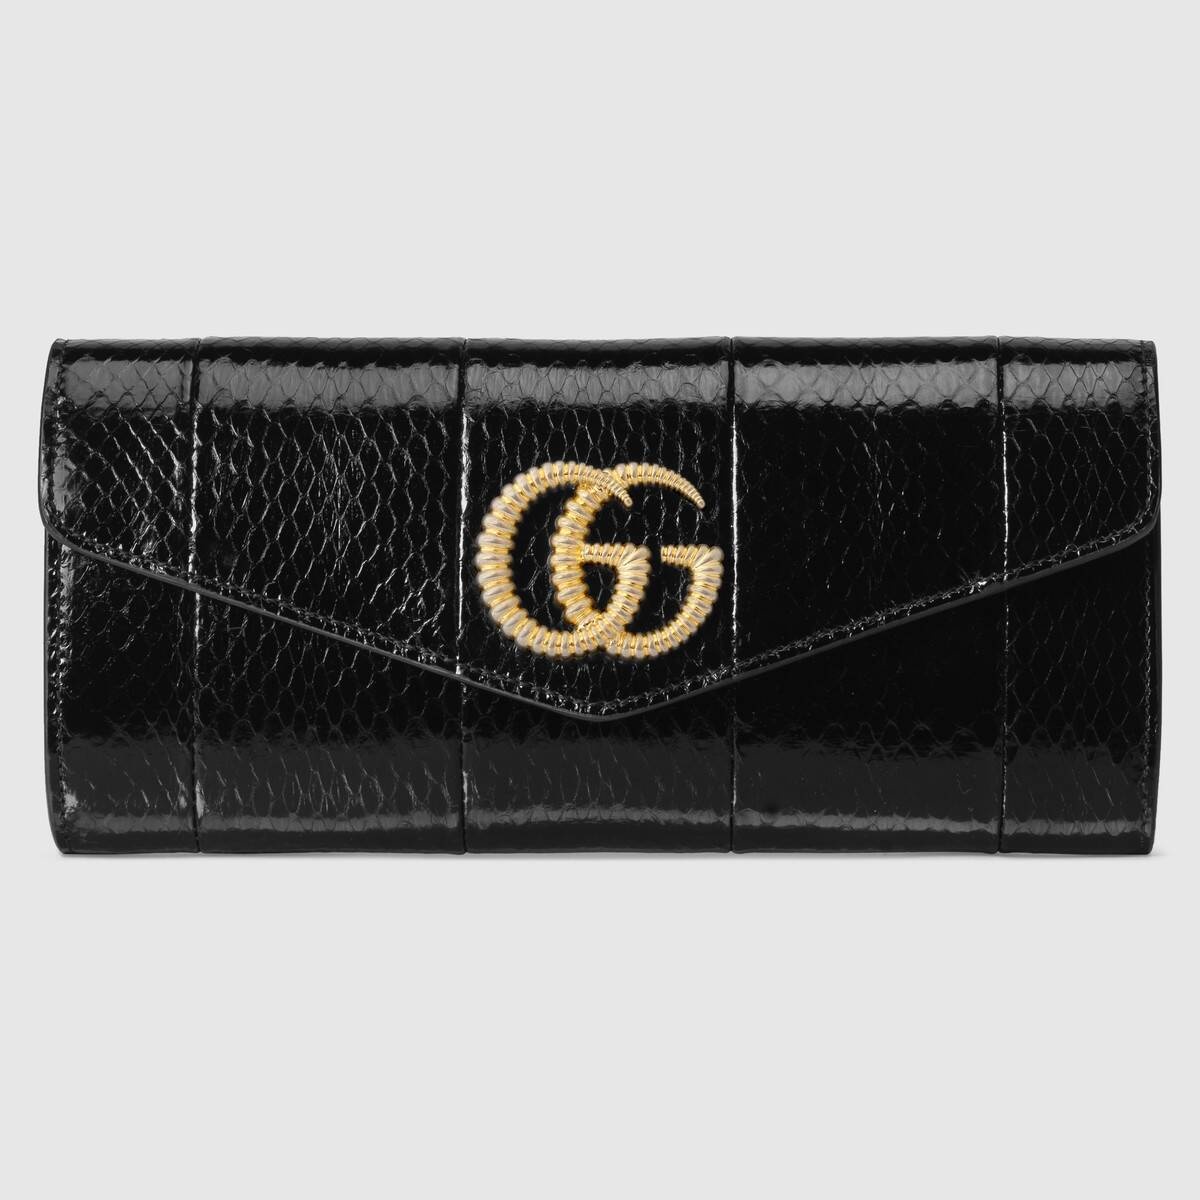 Broadway snakeskin clutch with Double G - 1